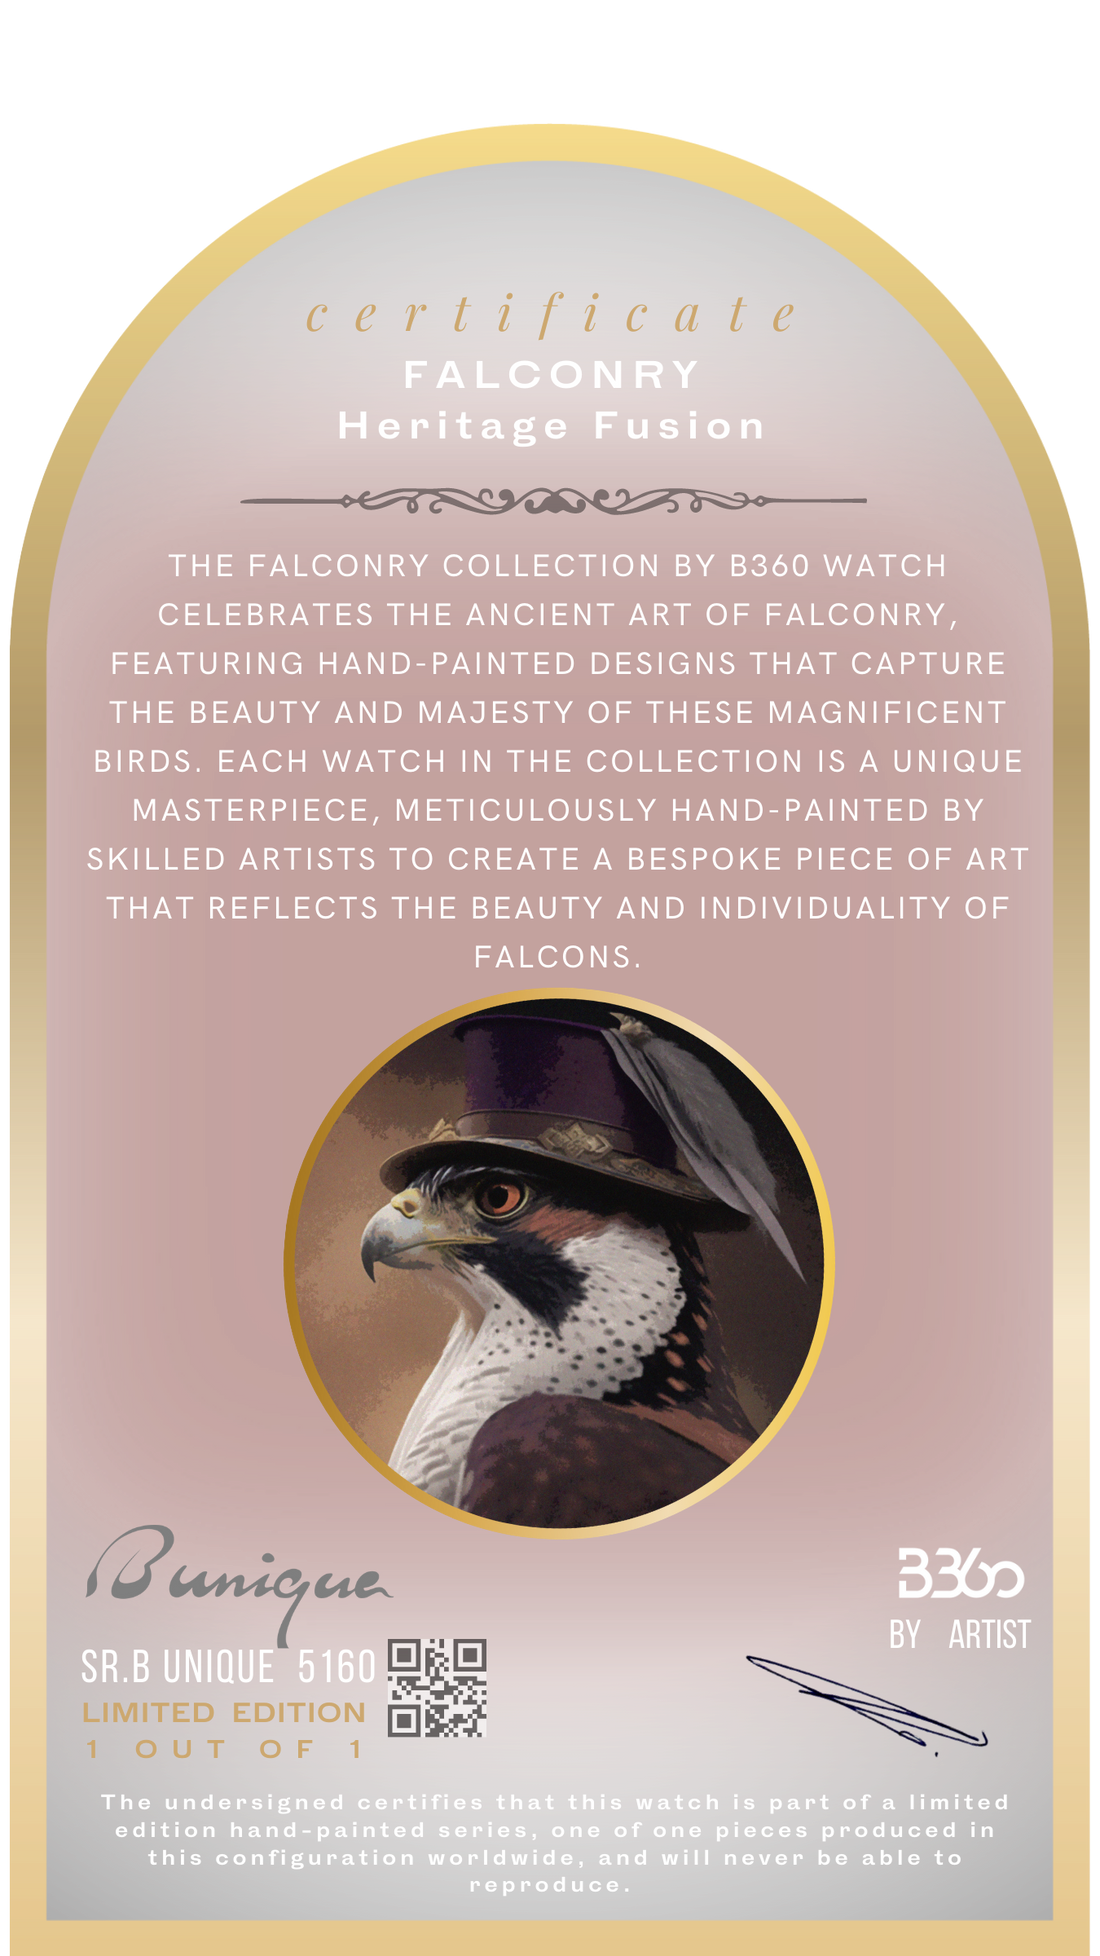 A one-of-a-kind watch from the B360 B Unique falconry  Collection featuring a stunning hand-painted design of falcons